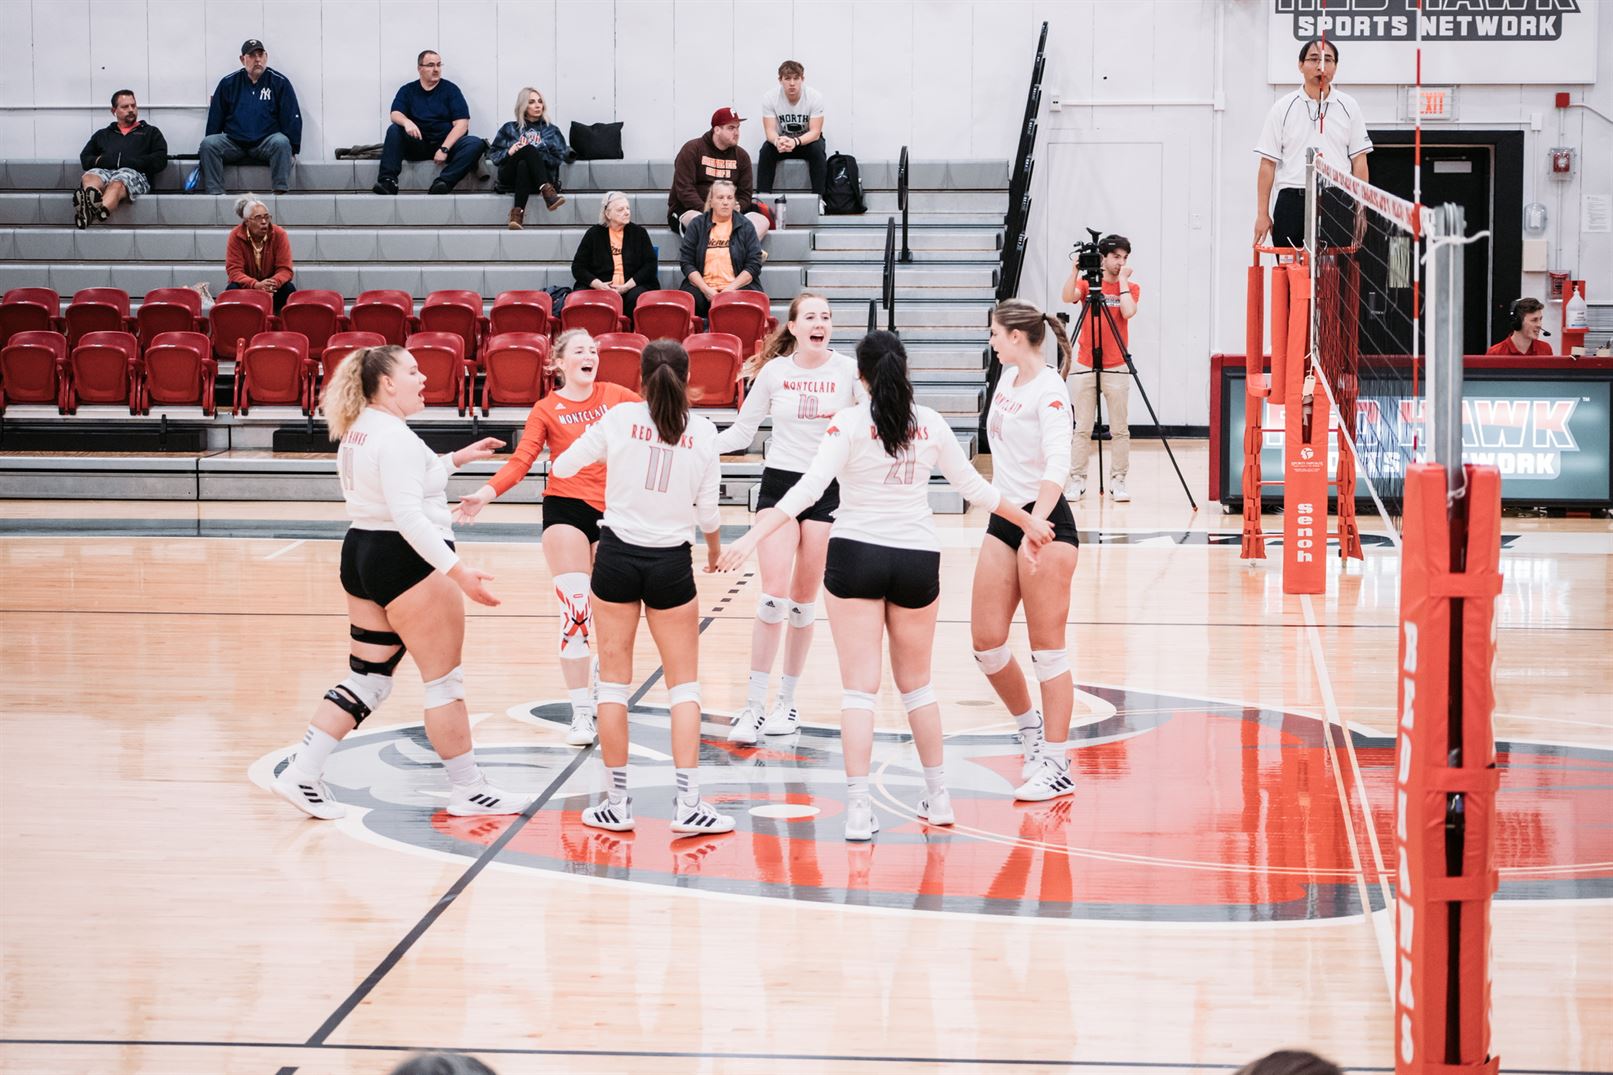 The Red Hawks celebrate after winning a point, something they did 75 times in this match. Dan Dreisbach | The Montclarion